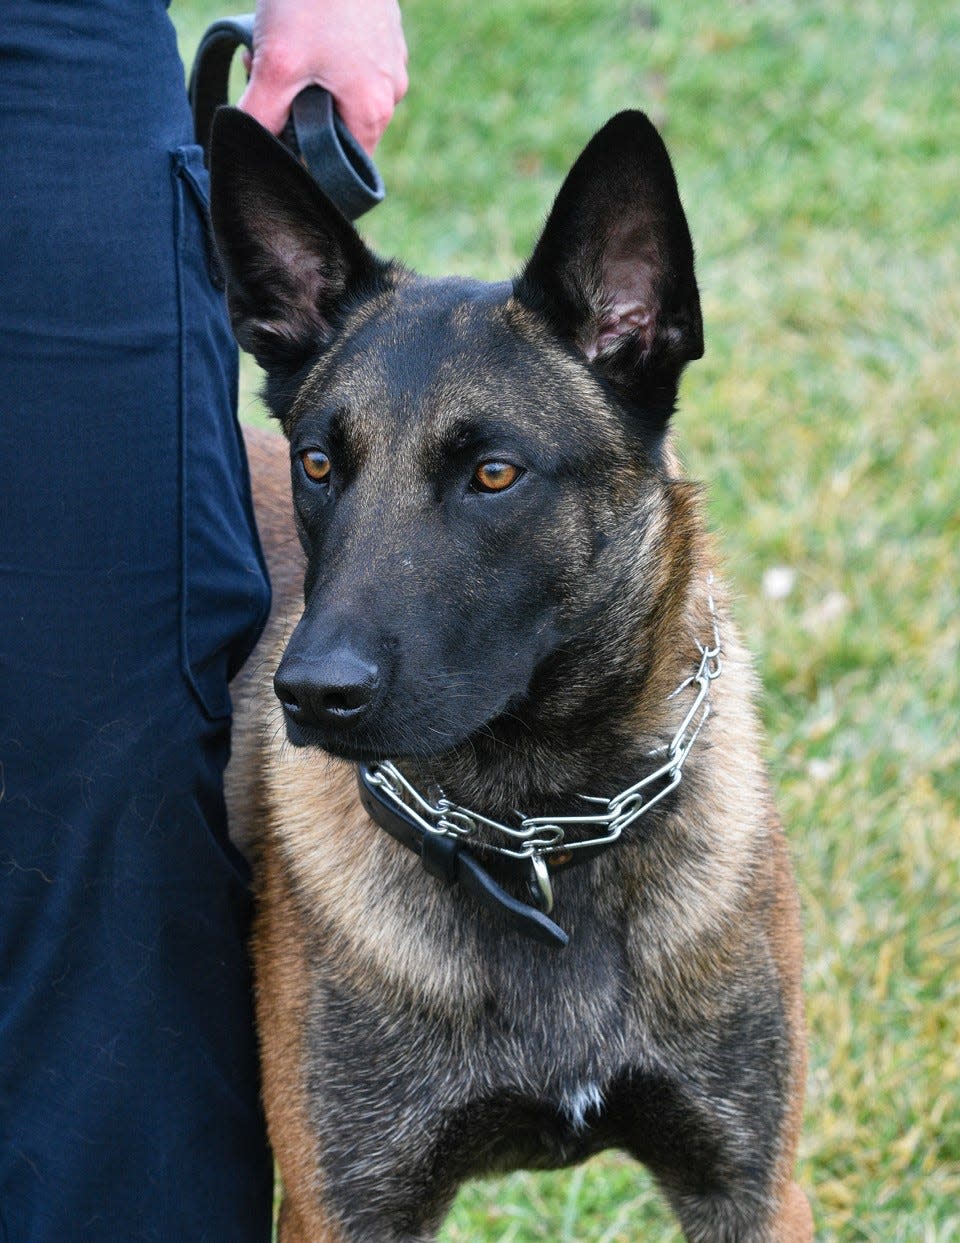 Aldo is a nearly two-year-old Belgian Malinois from the Czech Republic who serves with the Port Clinton Police Department.